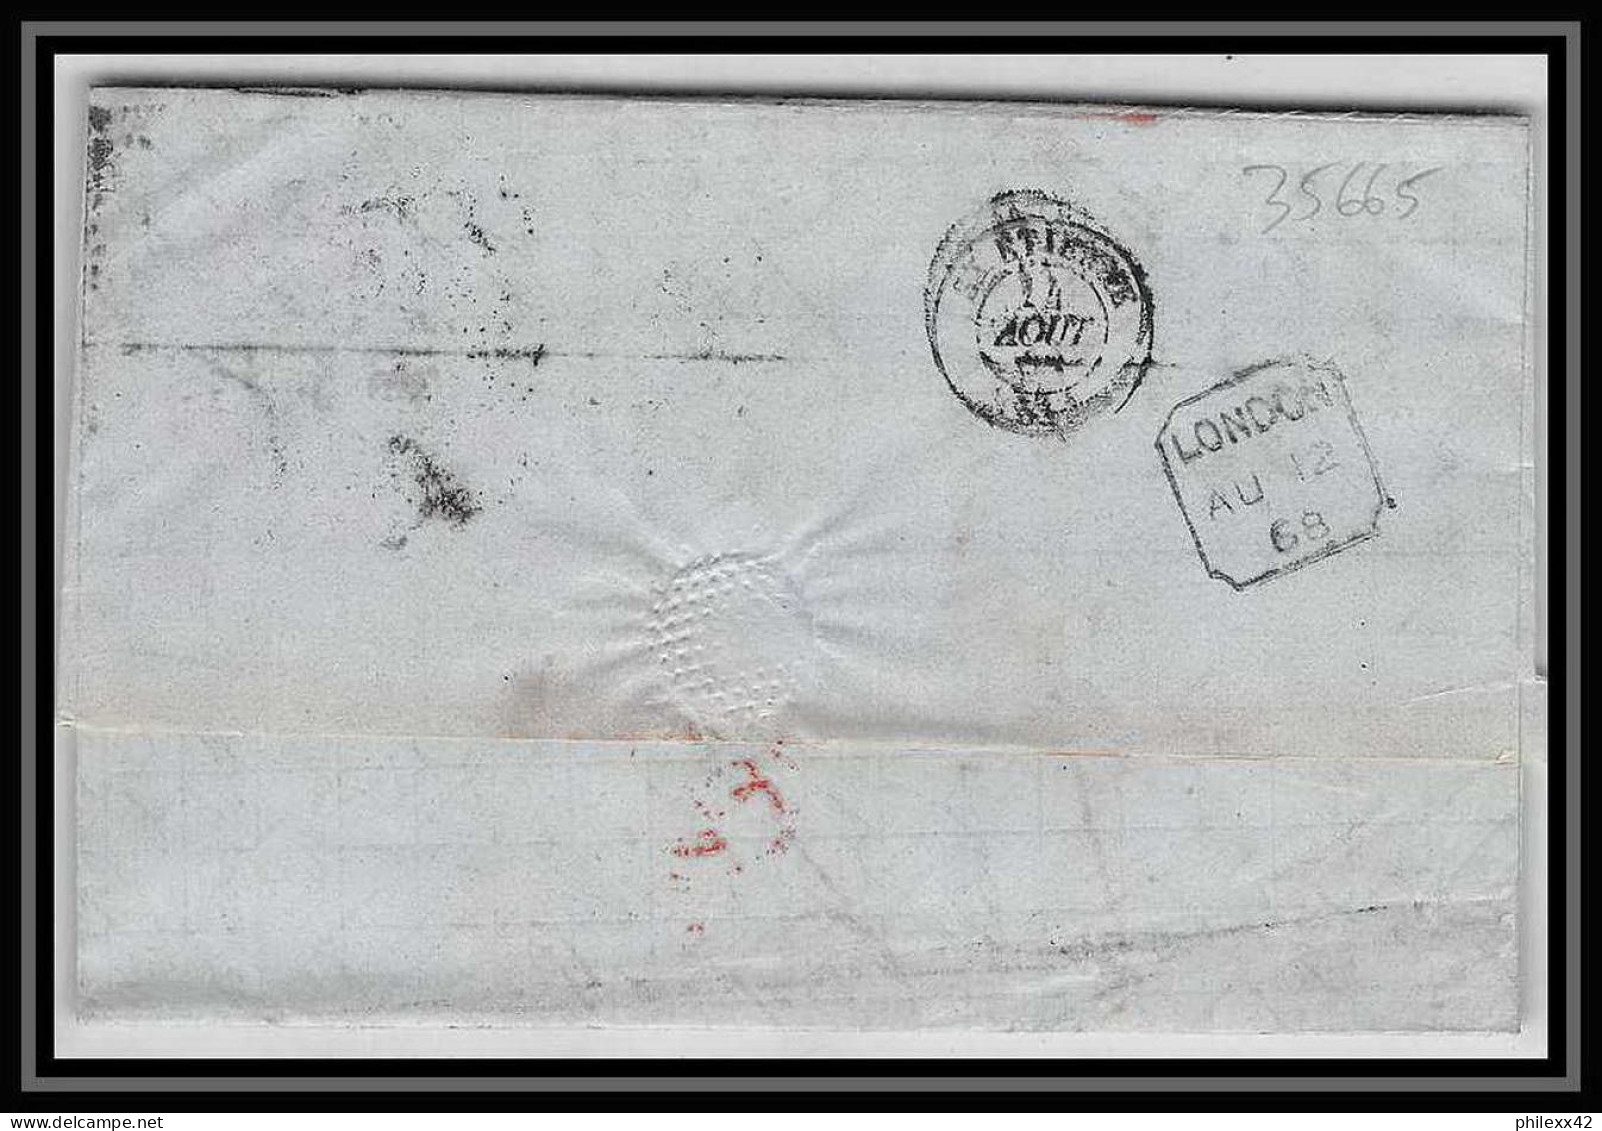 35665 N°32 Victoria 4p Red London St Etienne France 1868 Cachet 48 Lettre Cover Grande Bretagne England - Covers & Documents